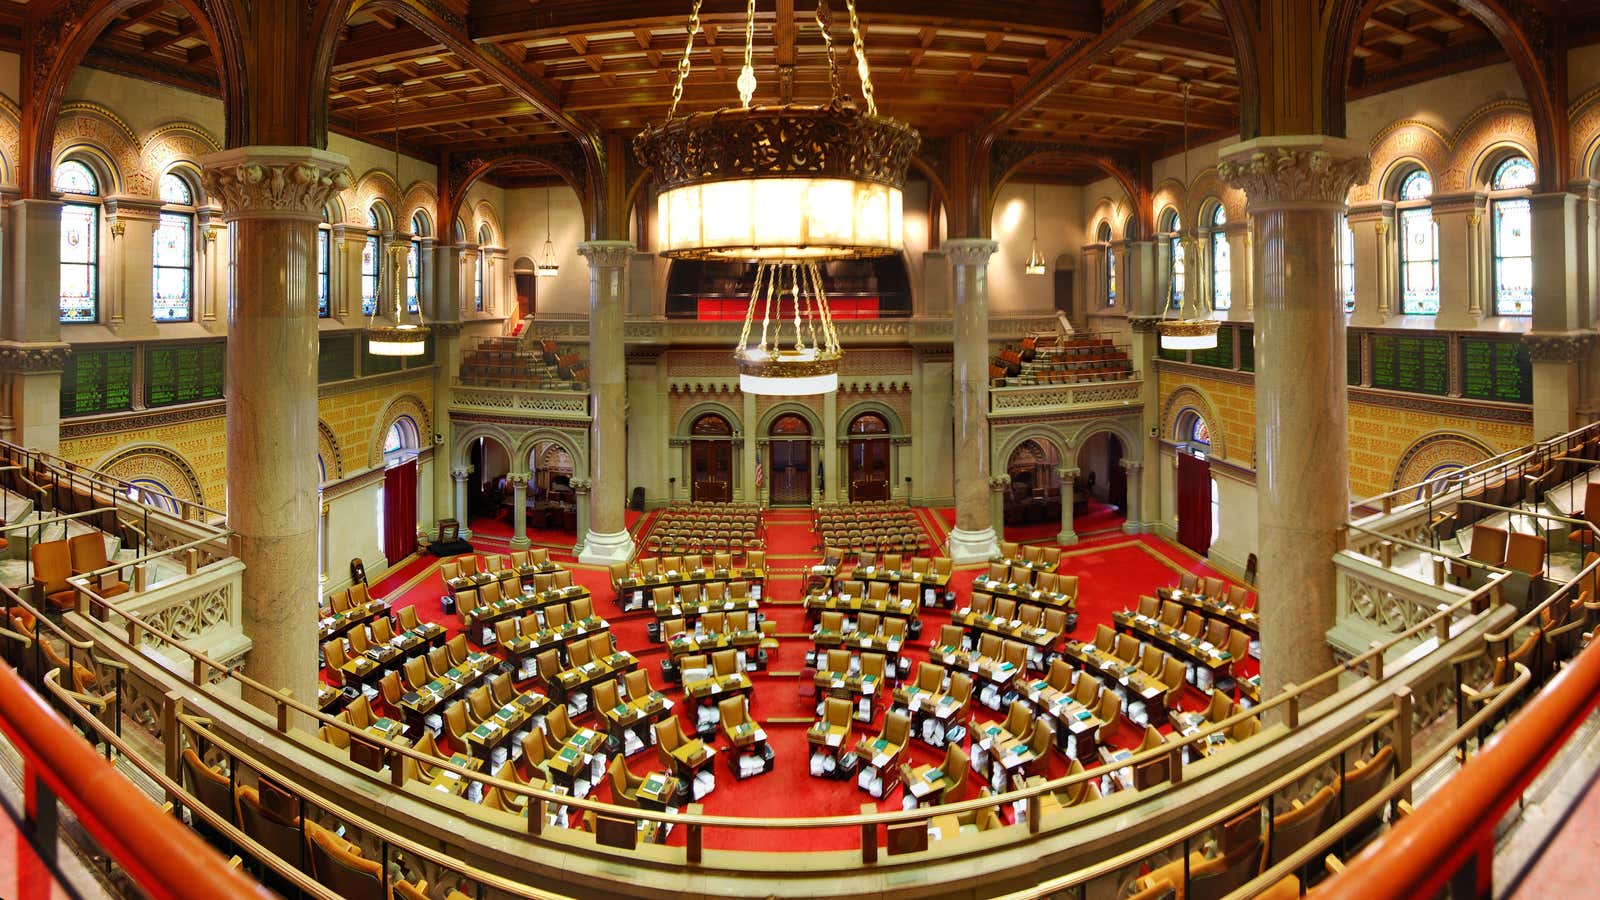 The New York state assembly chamber in Albany, New York.